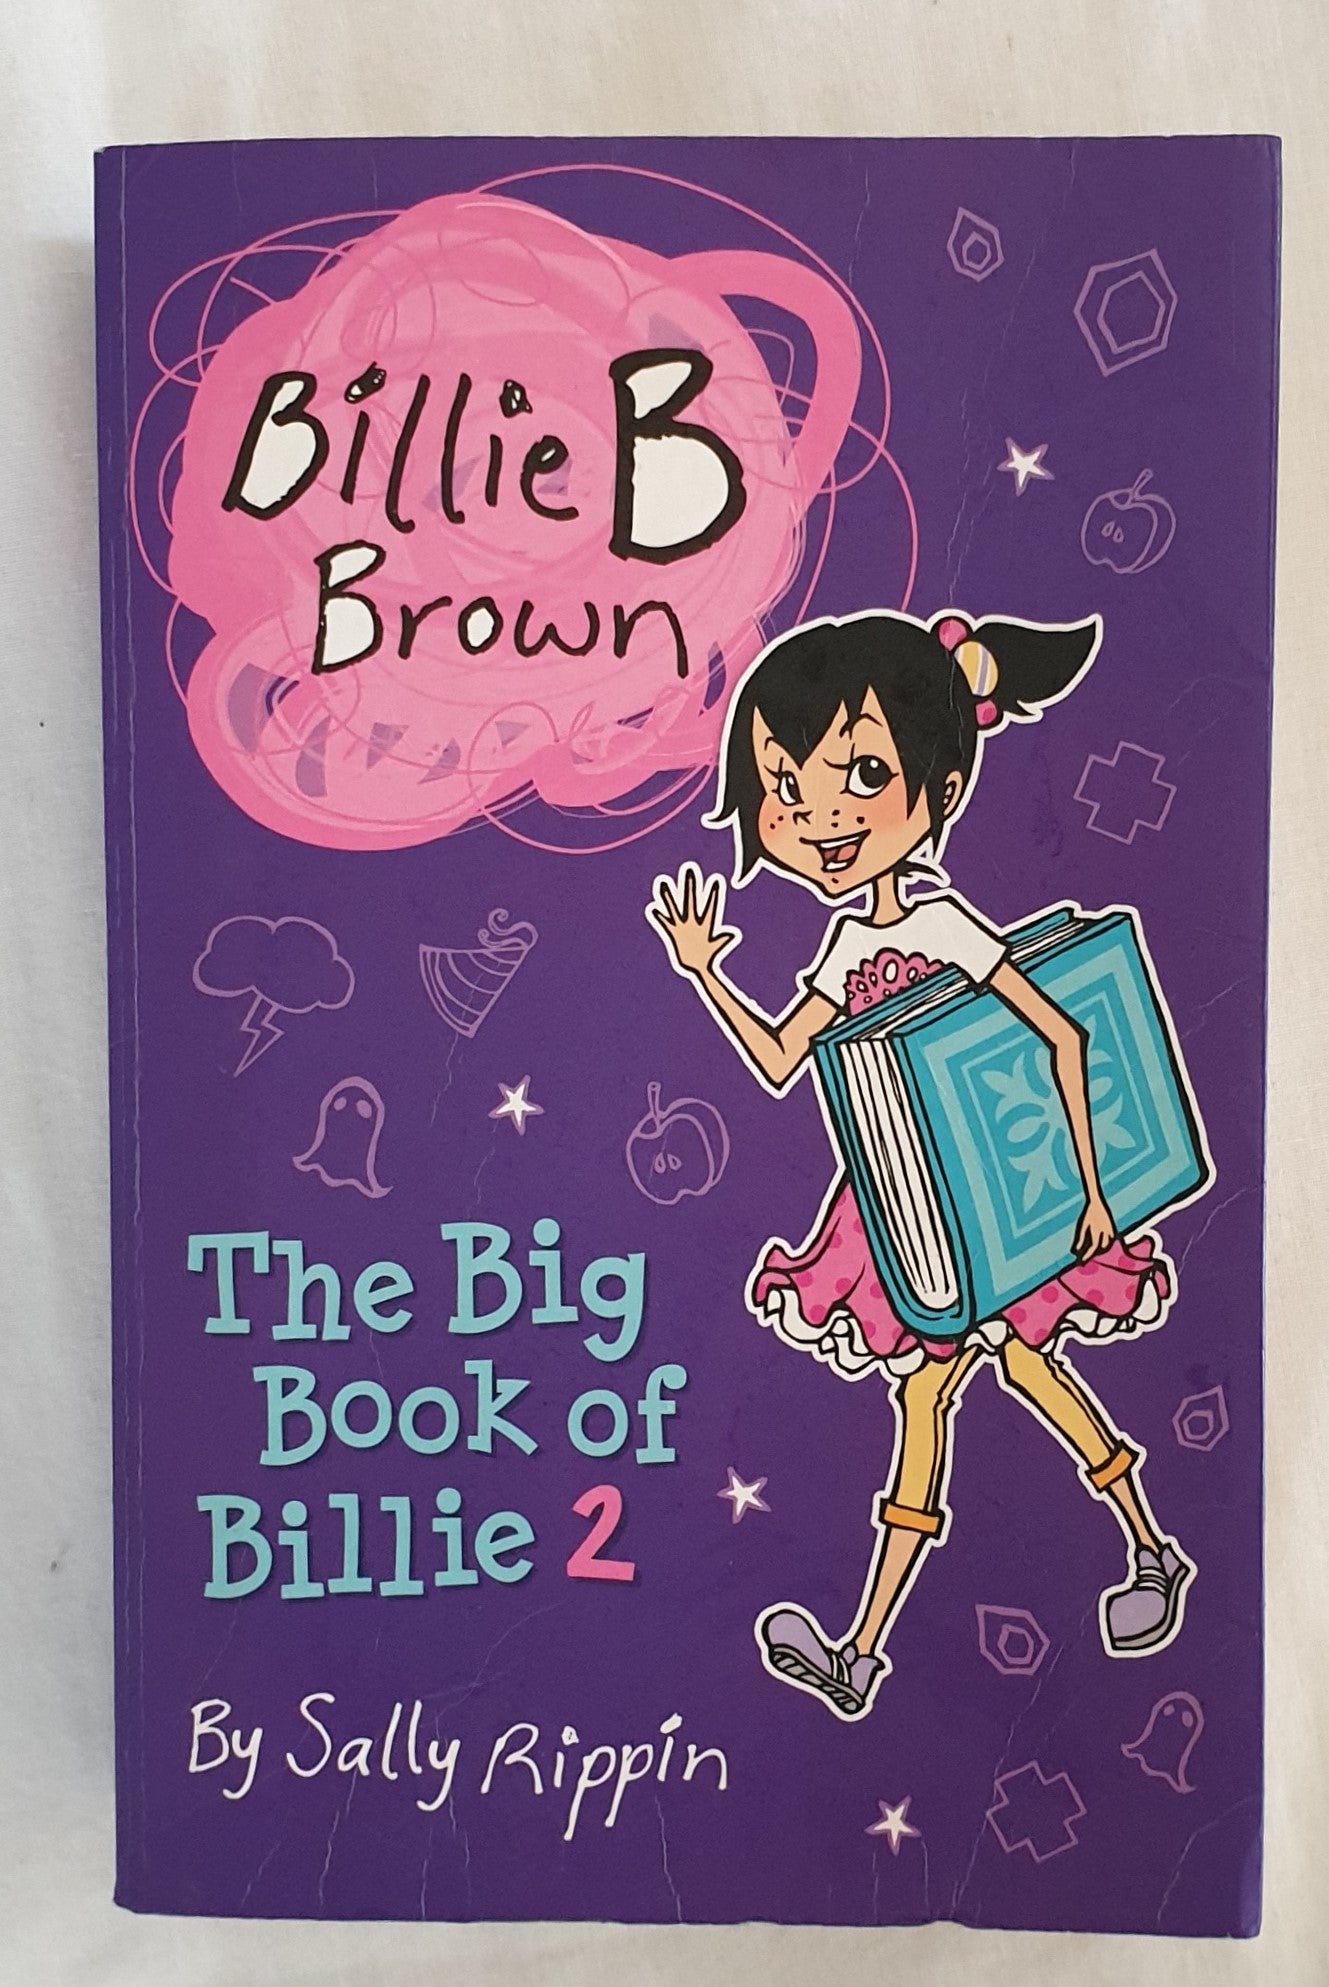 Billie B Brown  The Big Book of Billie 2  by Sally Rippin